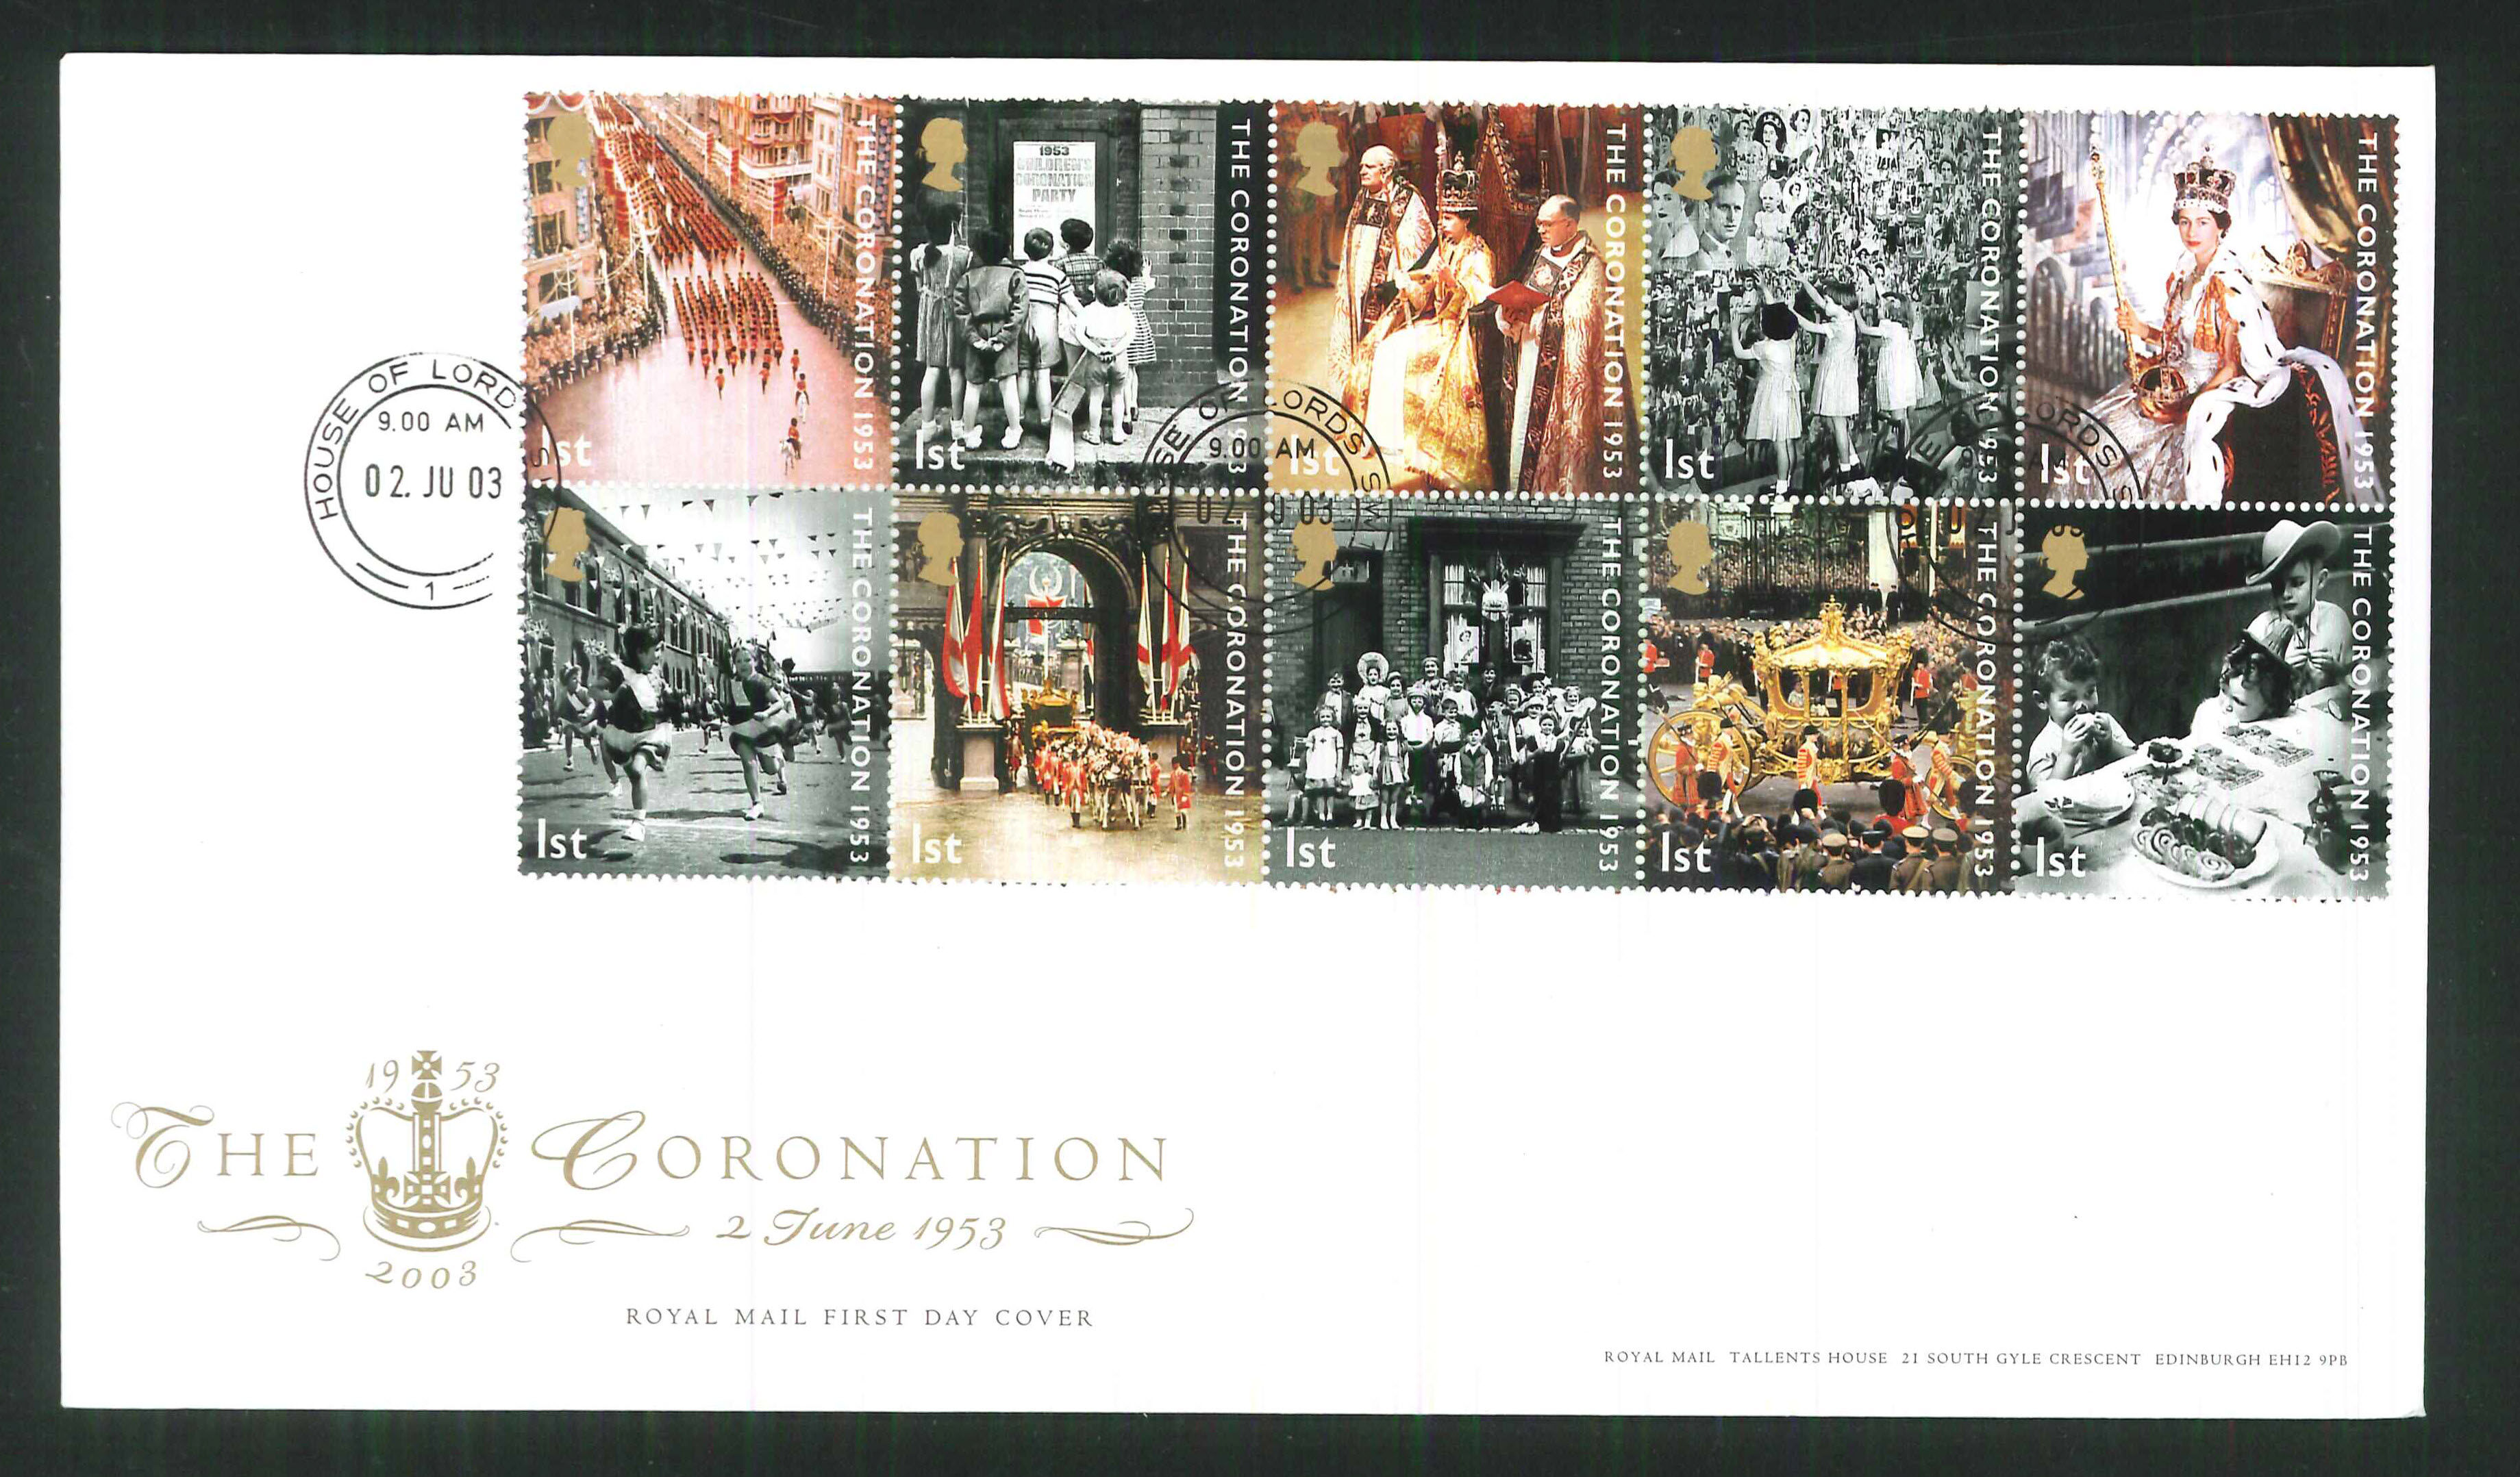 2003 Coronation Anniv. F D C House of Lords CDS Handstamp